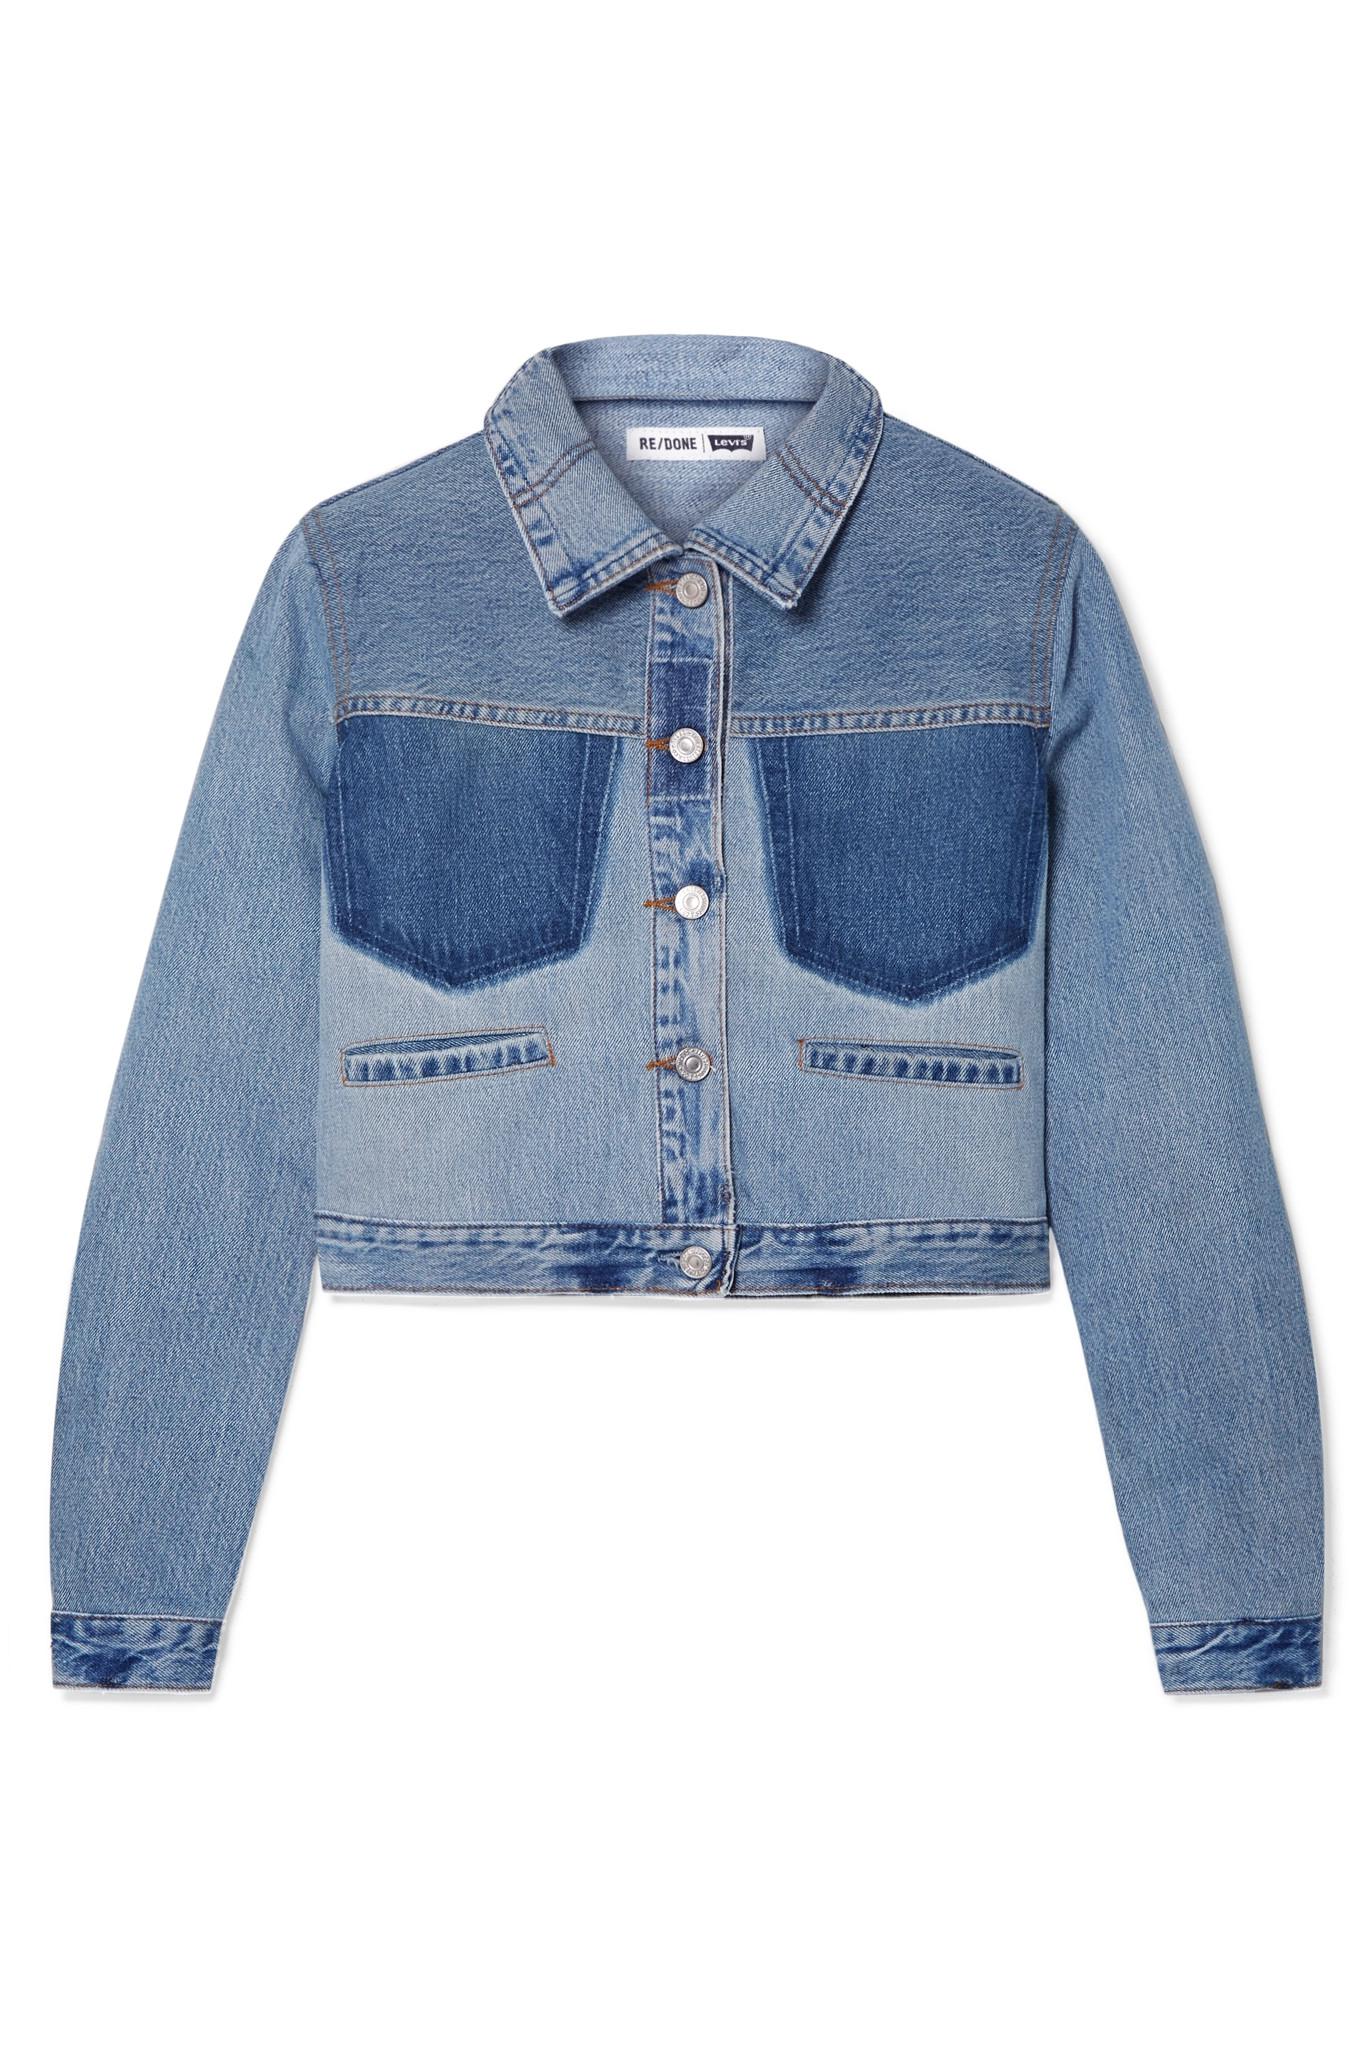 RE/DONE + Levi's Cropped Two-tone Denim Jacket in Blue - Lyst